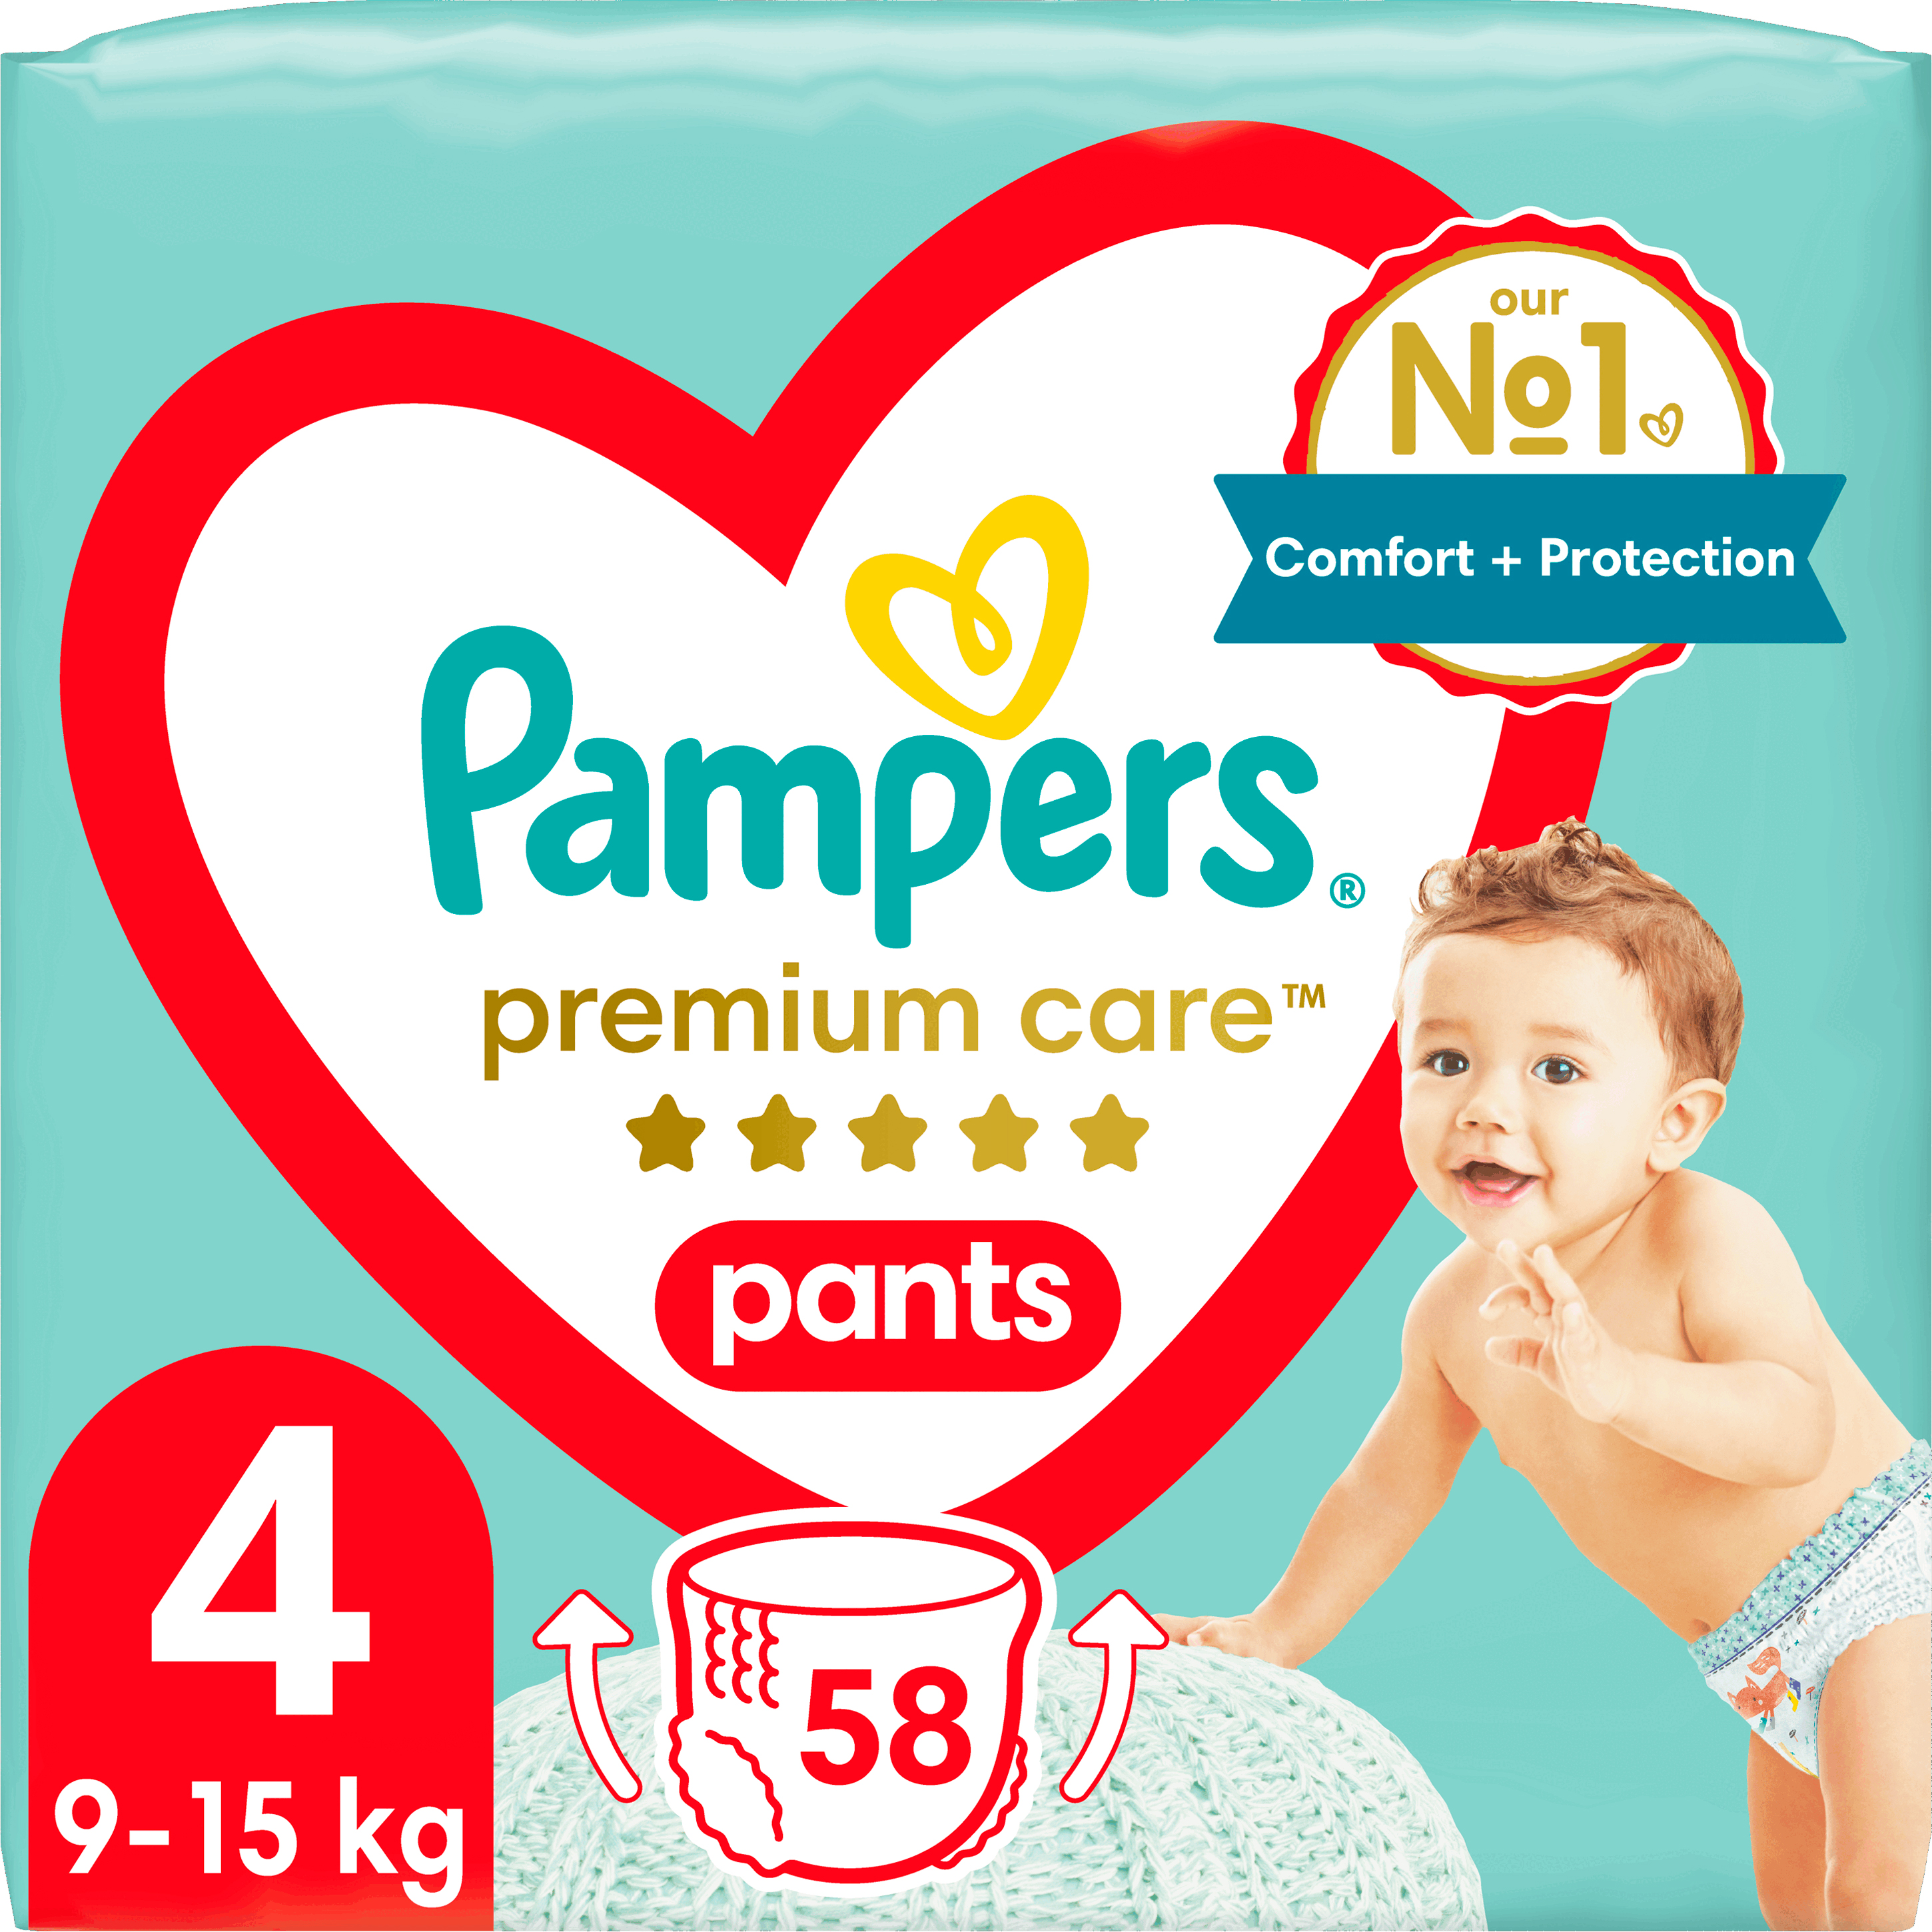 pieluchy pampers active baby 4